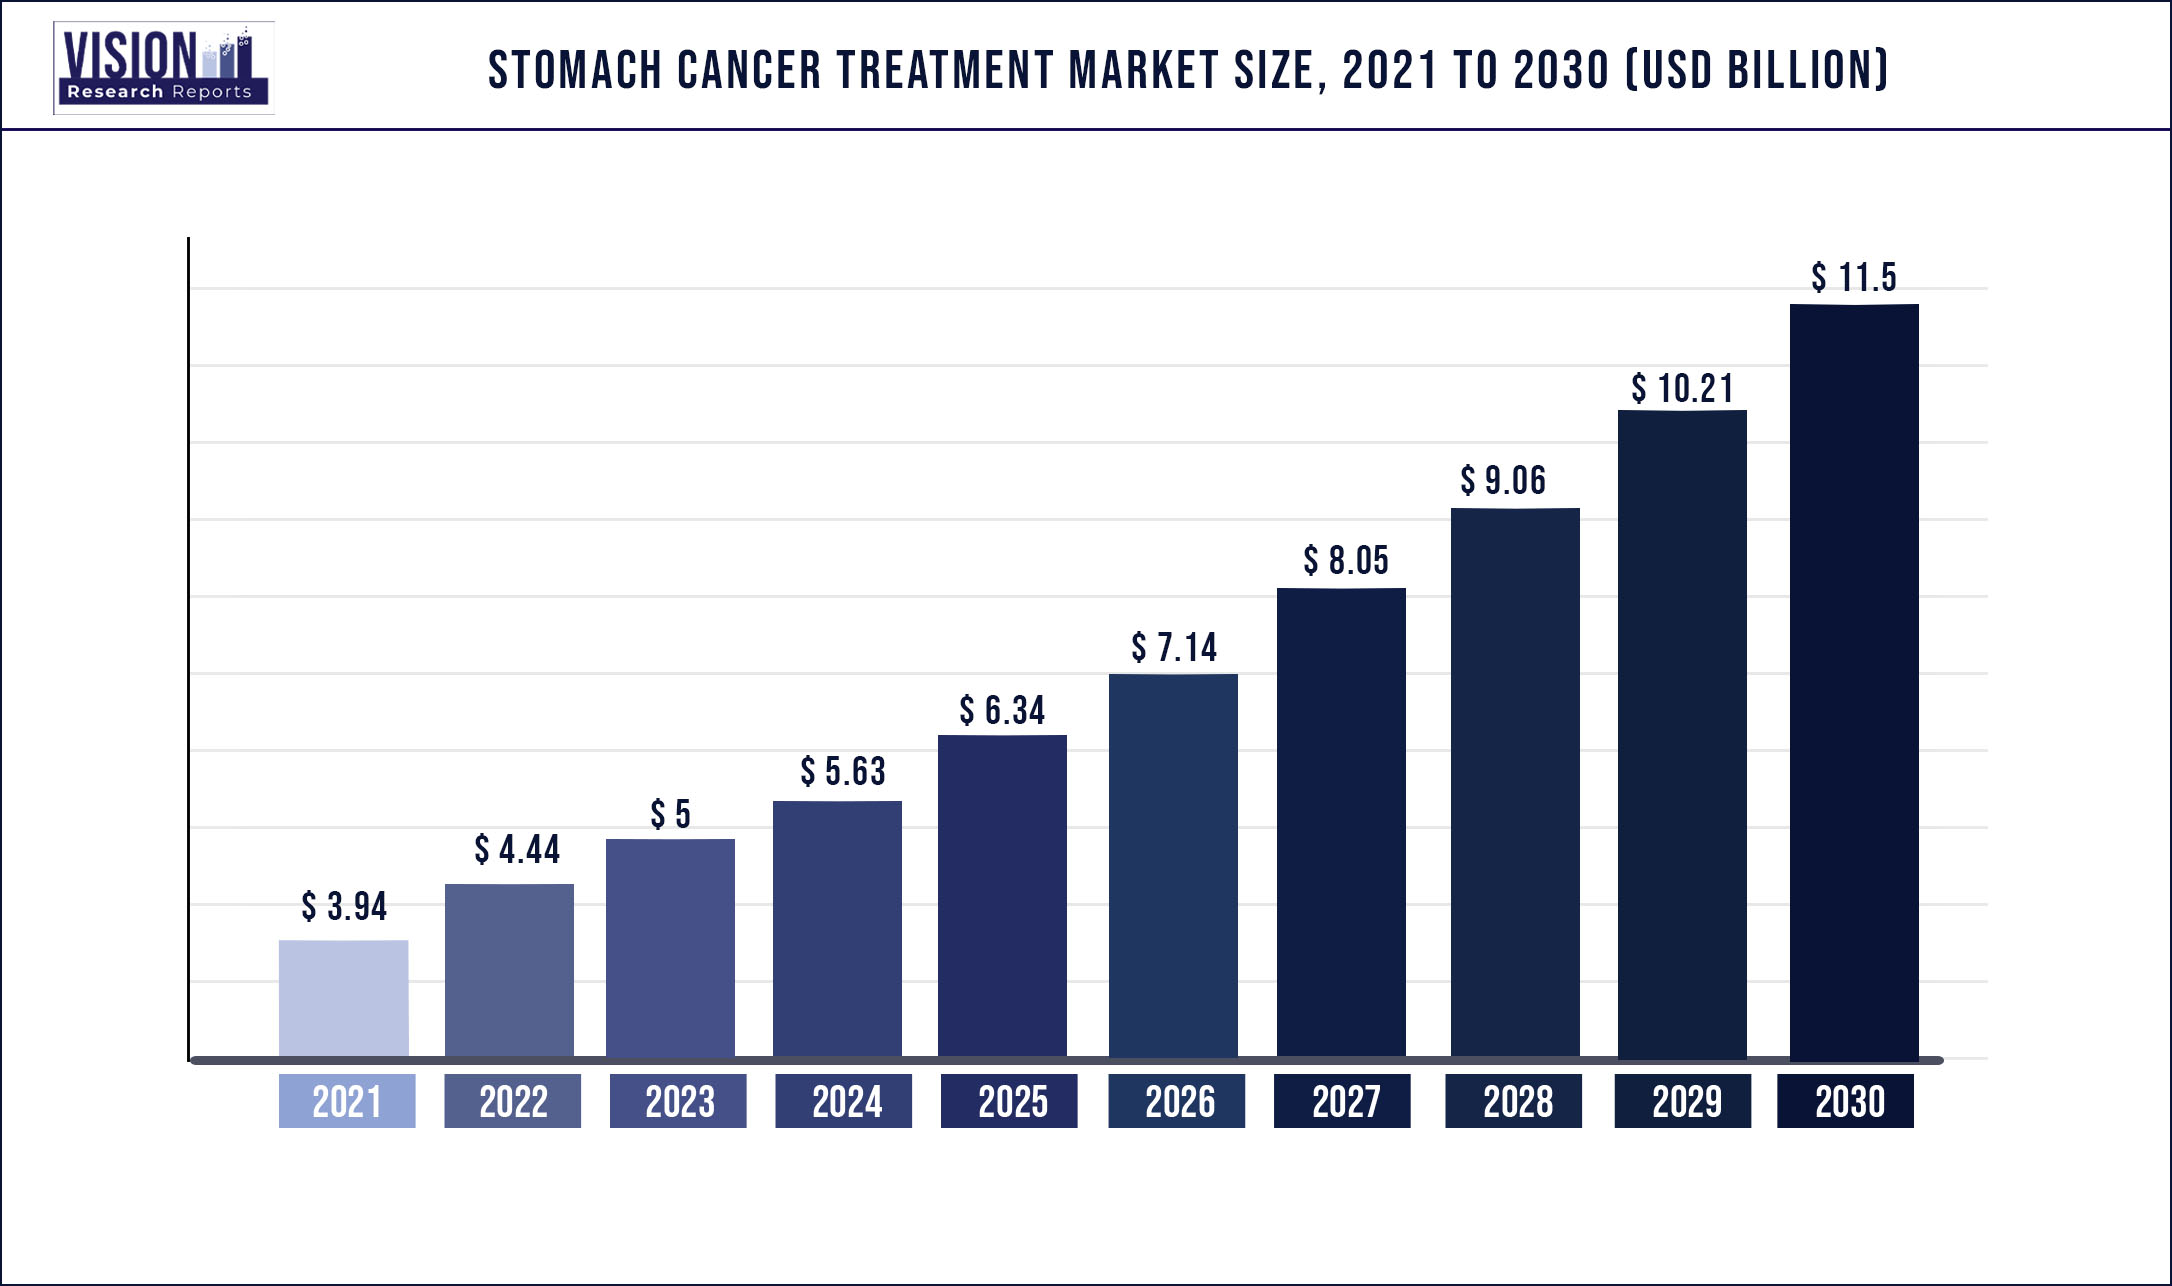 Stomach Cancer Treatment Market Size 2021 to 2030